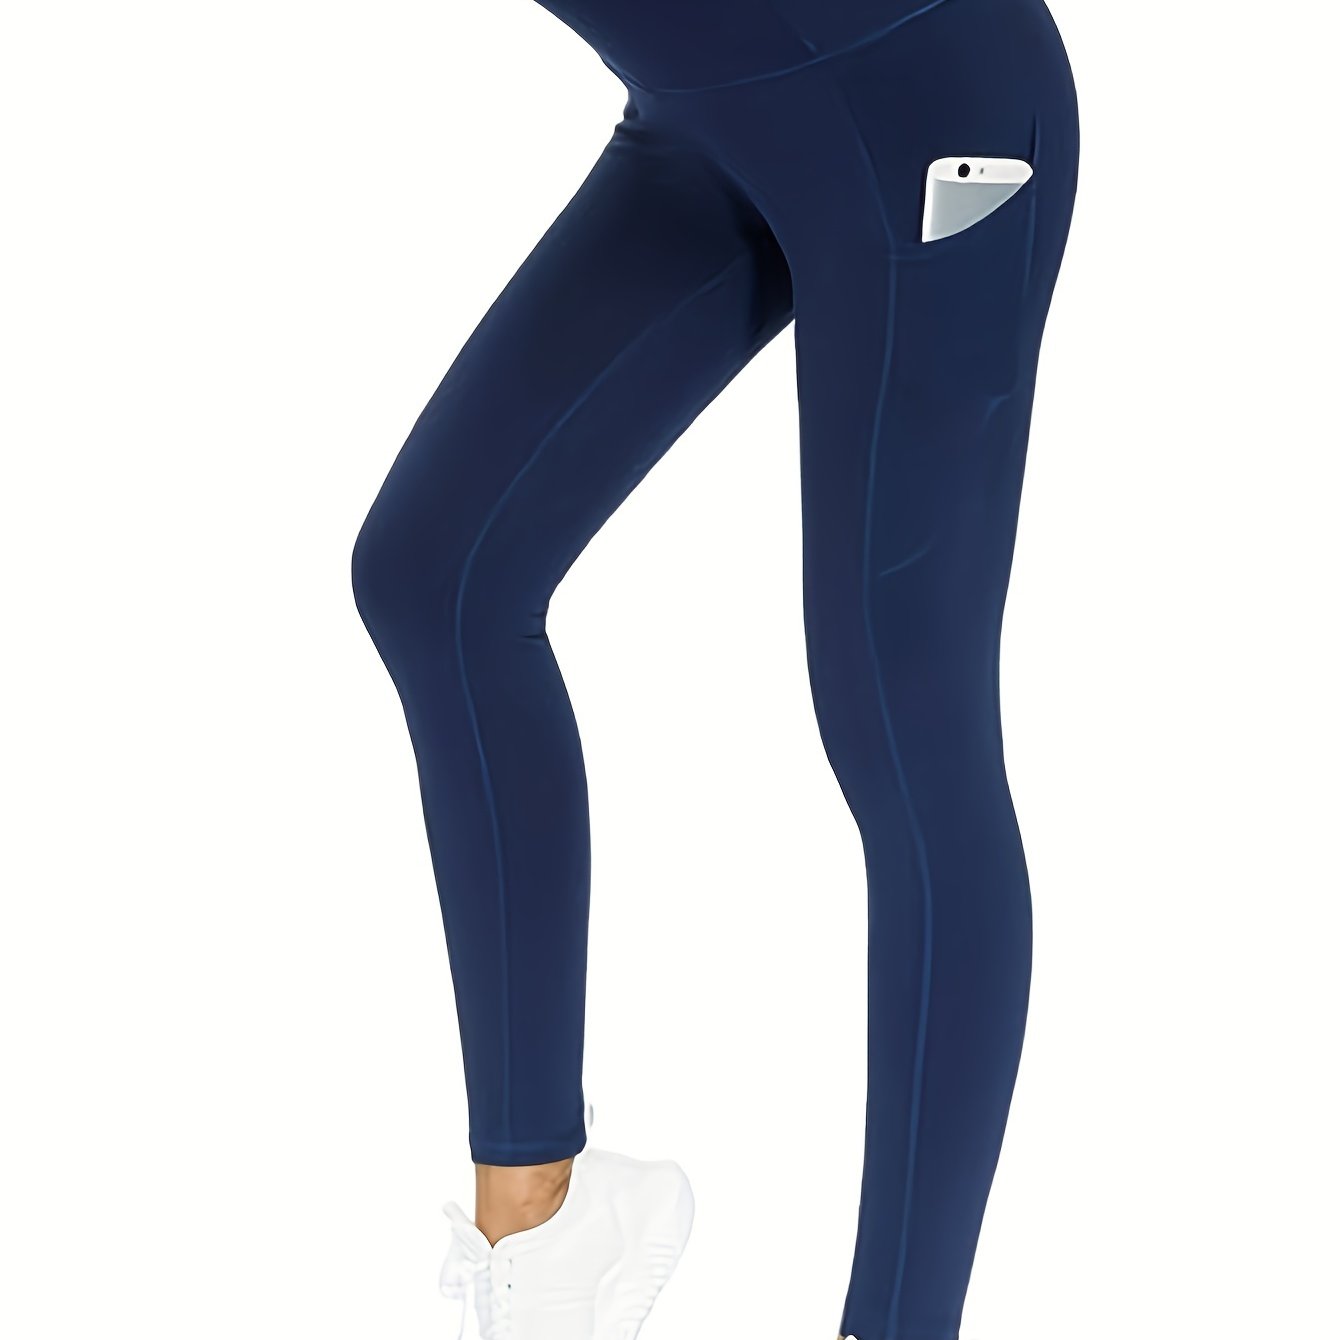 Phonepocketed Plus Size Sports Leggings High Stretch Butt Lifting Blue